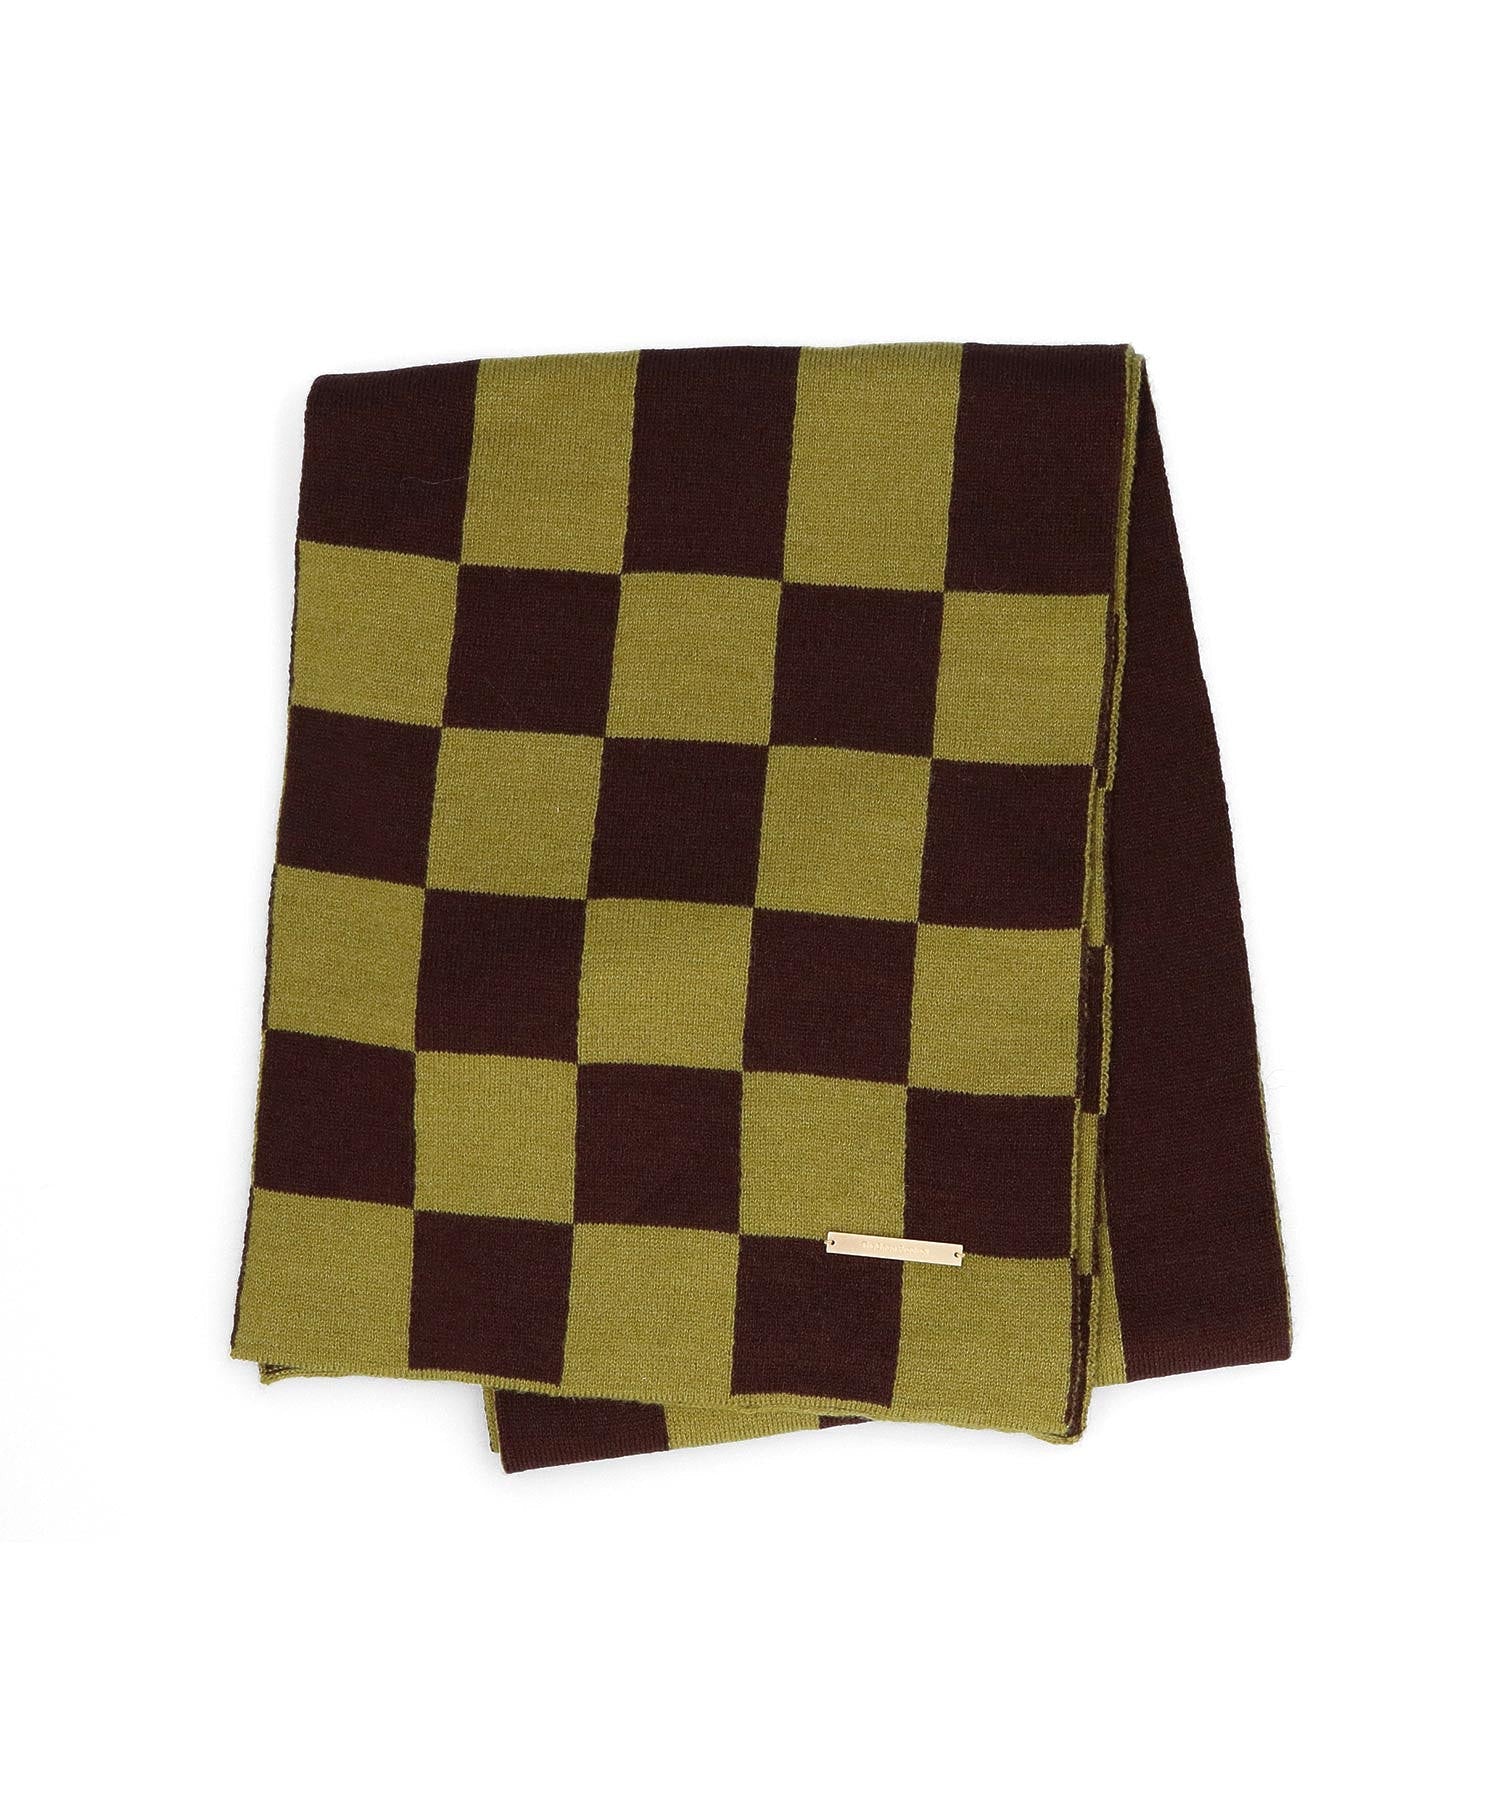 TheOpen Product /ザオープンプロダクト CHESSBOARD CHECK MUFFLER GTO214AC001